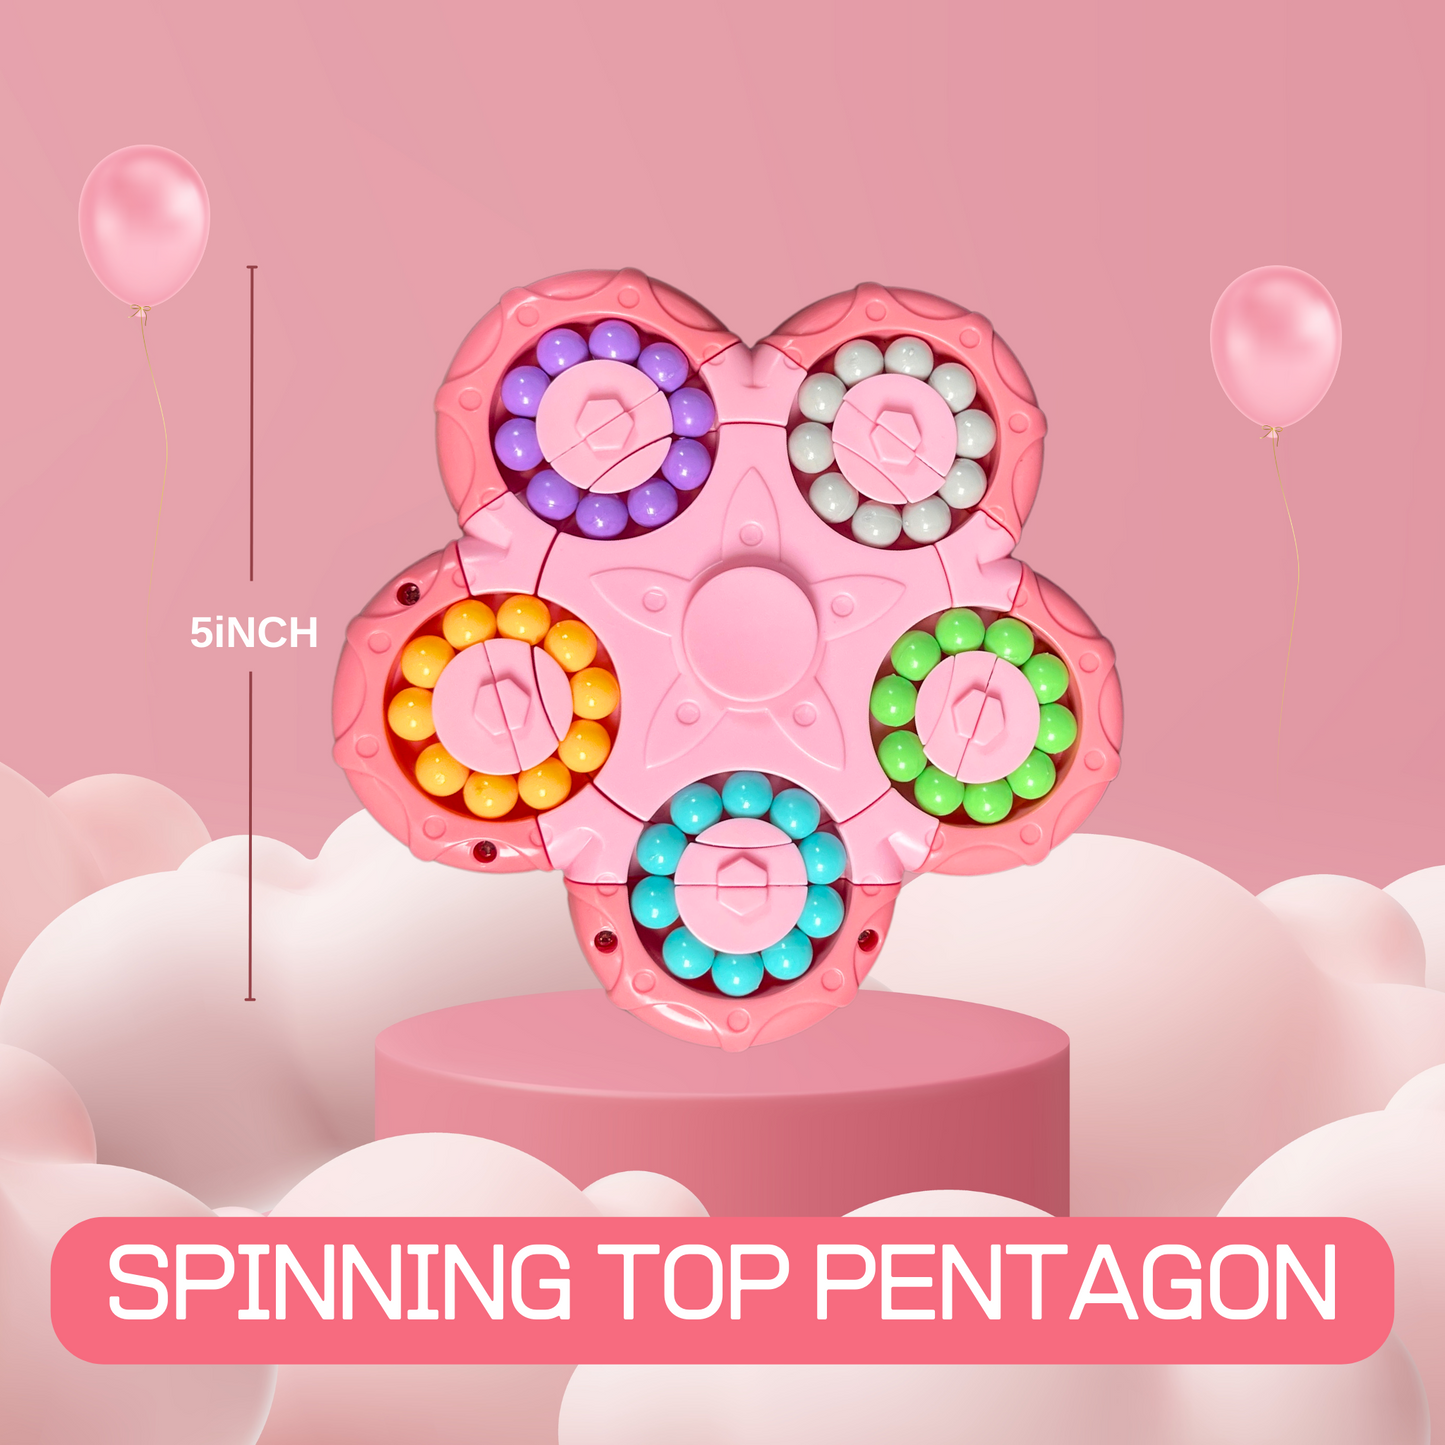 Spinning Top Pentagon Puzzle